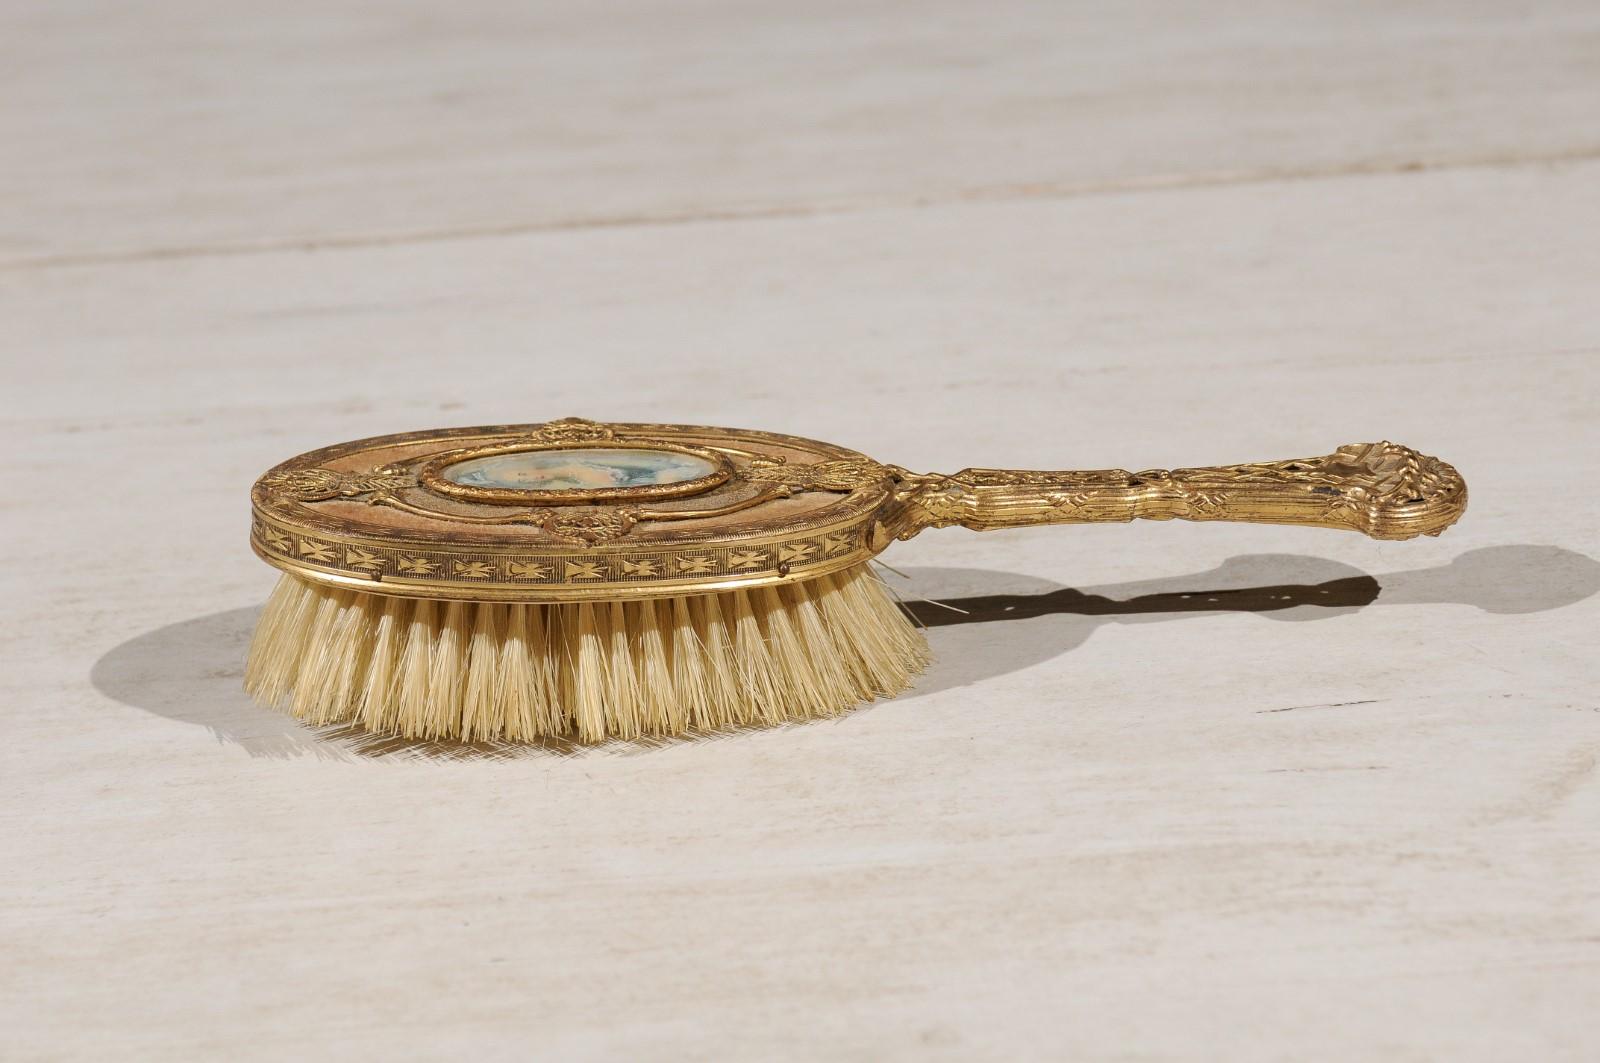 A French brass filigree horsehair brush from the Turn of the century, with hand painted portrait. Born in France at the end of the 19th, early 20th century, this lovely brush features a brass body presenting a filigree décor. A medallion, depicting